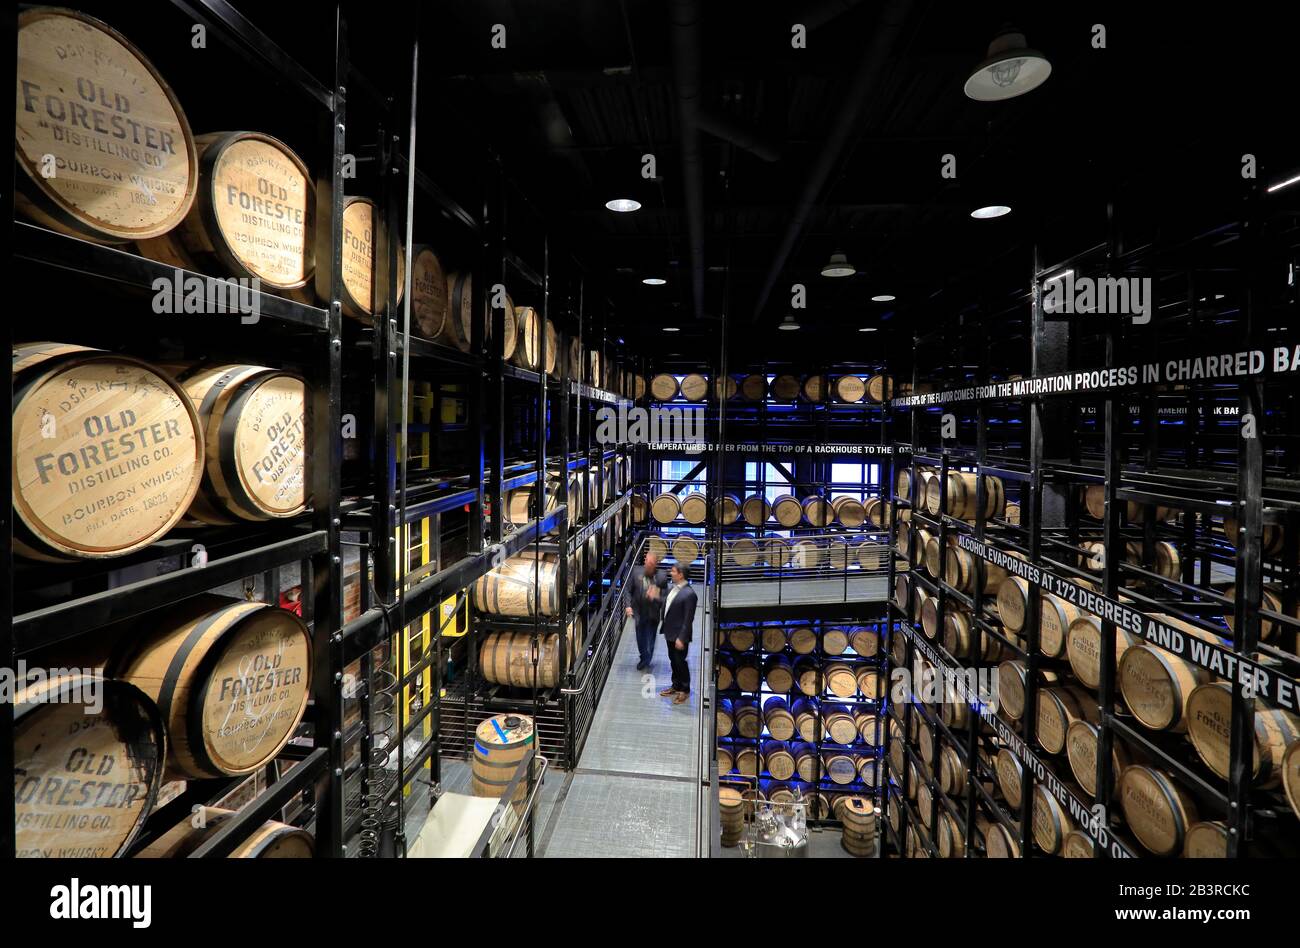 Rack house Bourbon whiskey warehouse of Old Forester Distilling Co in Whiskey Row.Louisville.Kentucky.USA Stock Photo